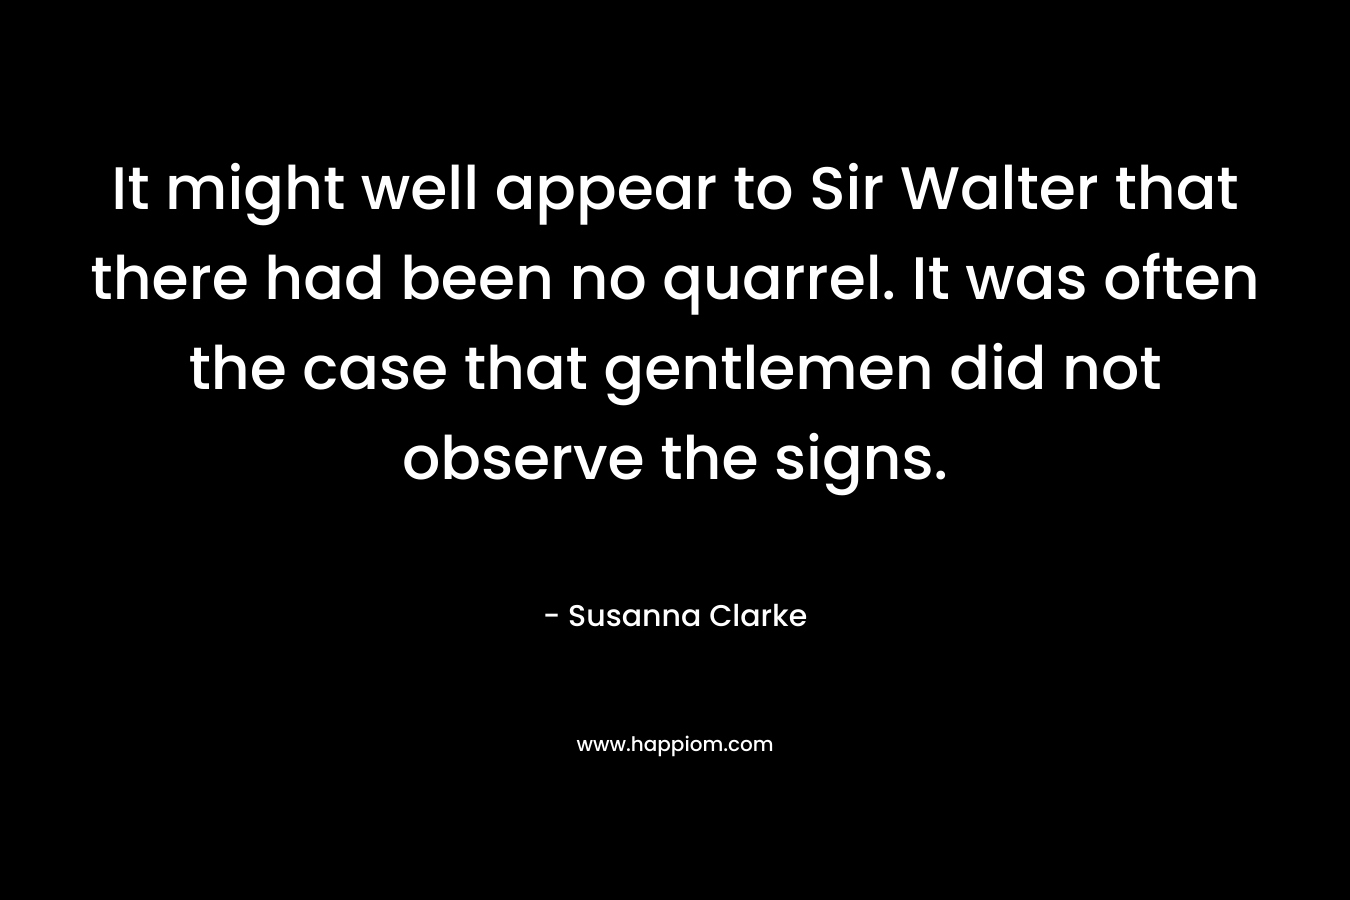 It might well appear to Sir Walter that there had been no quarrel. It was often the case that gentlemen did not observe the signs. – Susanna Clarke